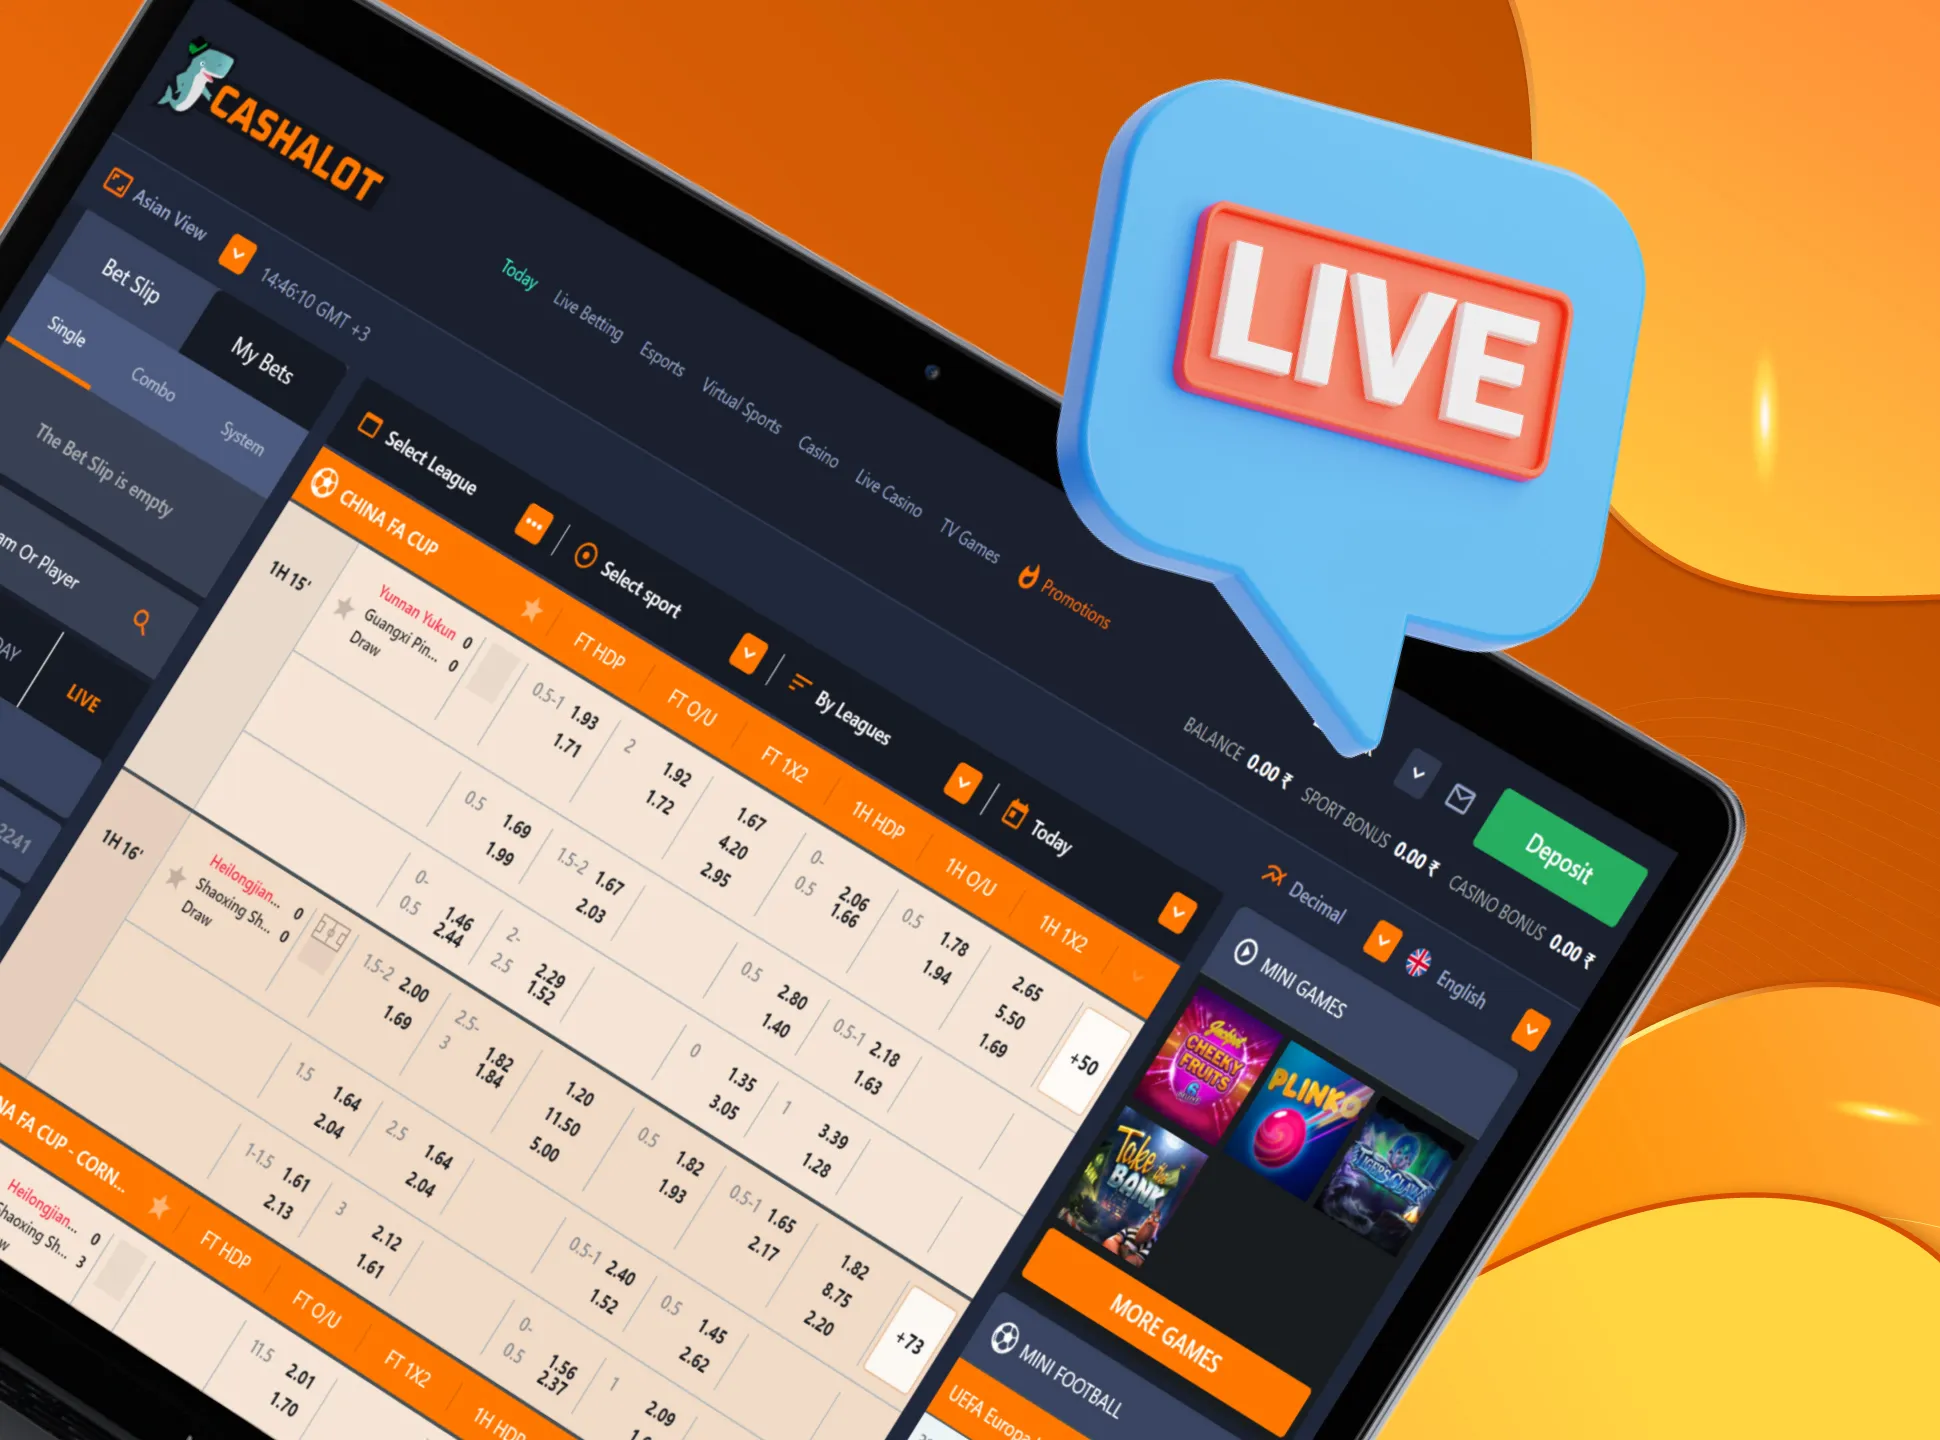 Watch games in a live format on the Cashalot broadcast page.